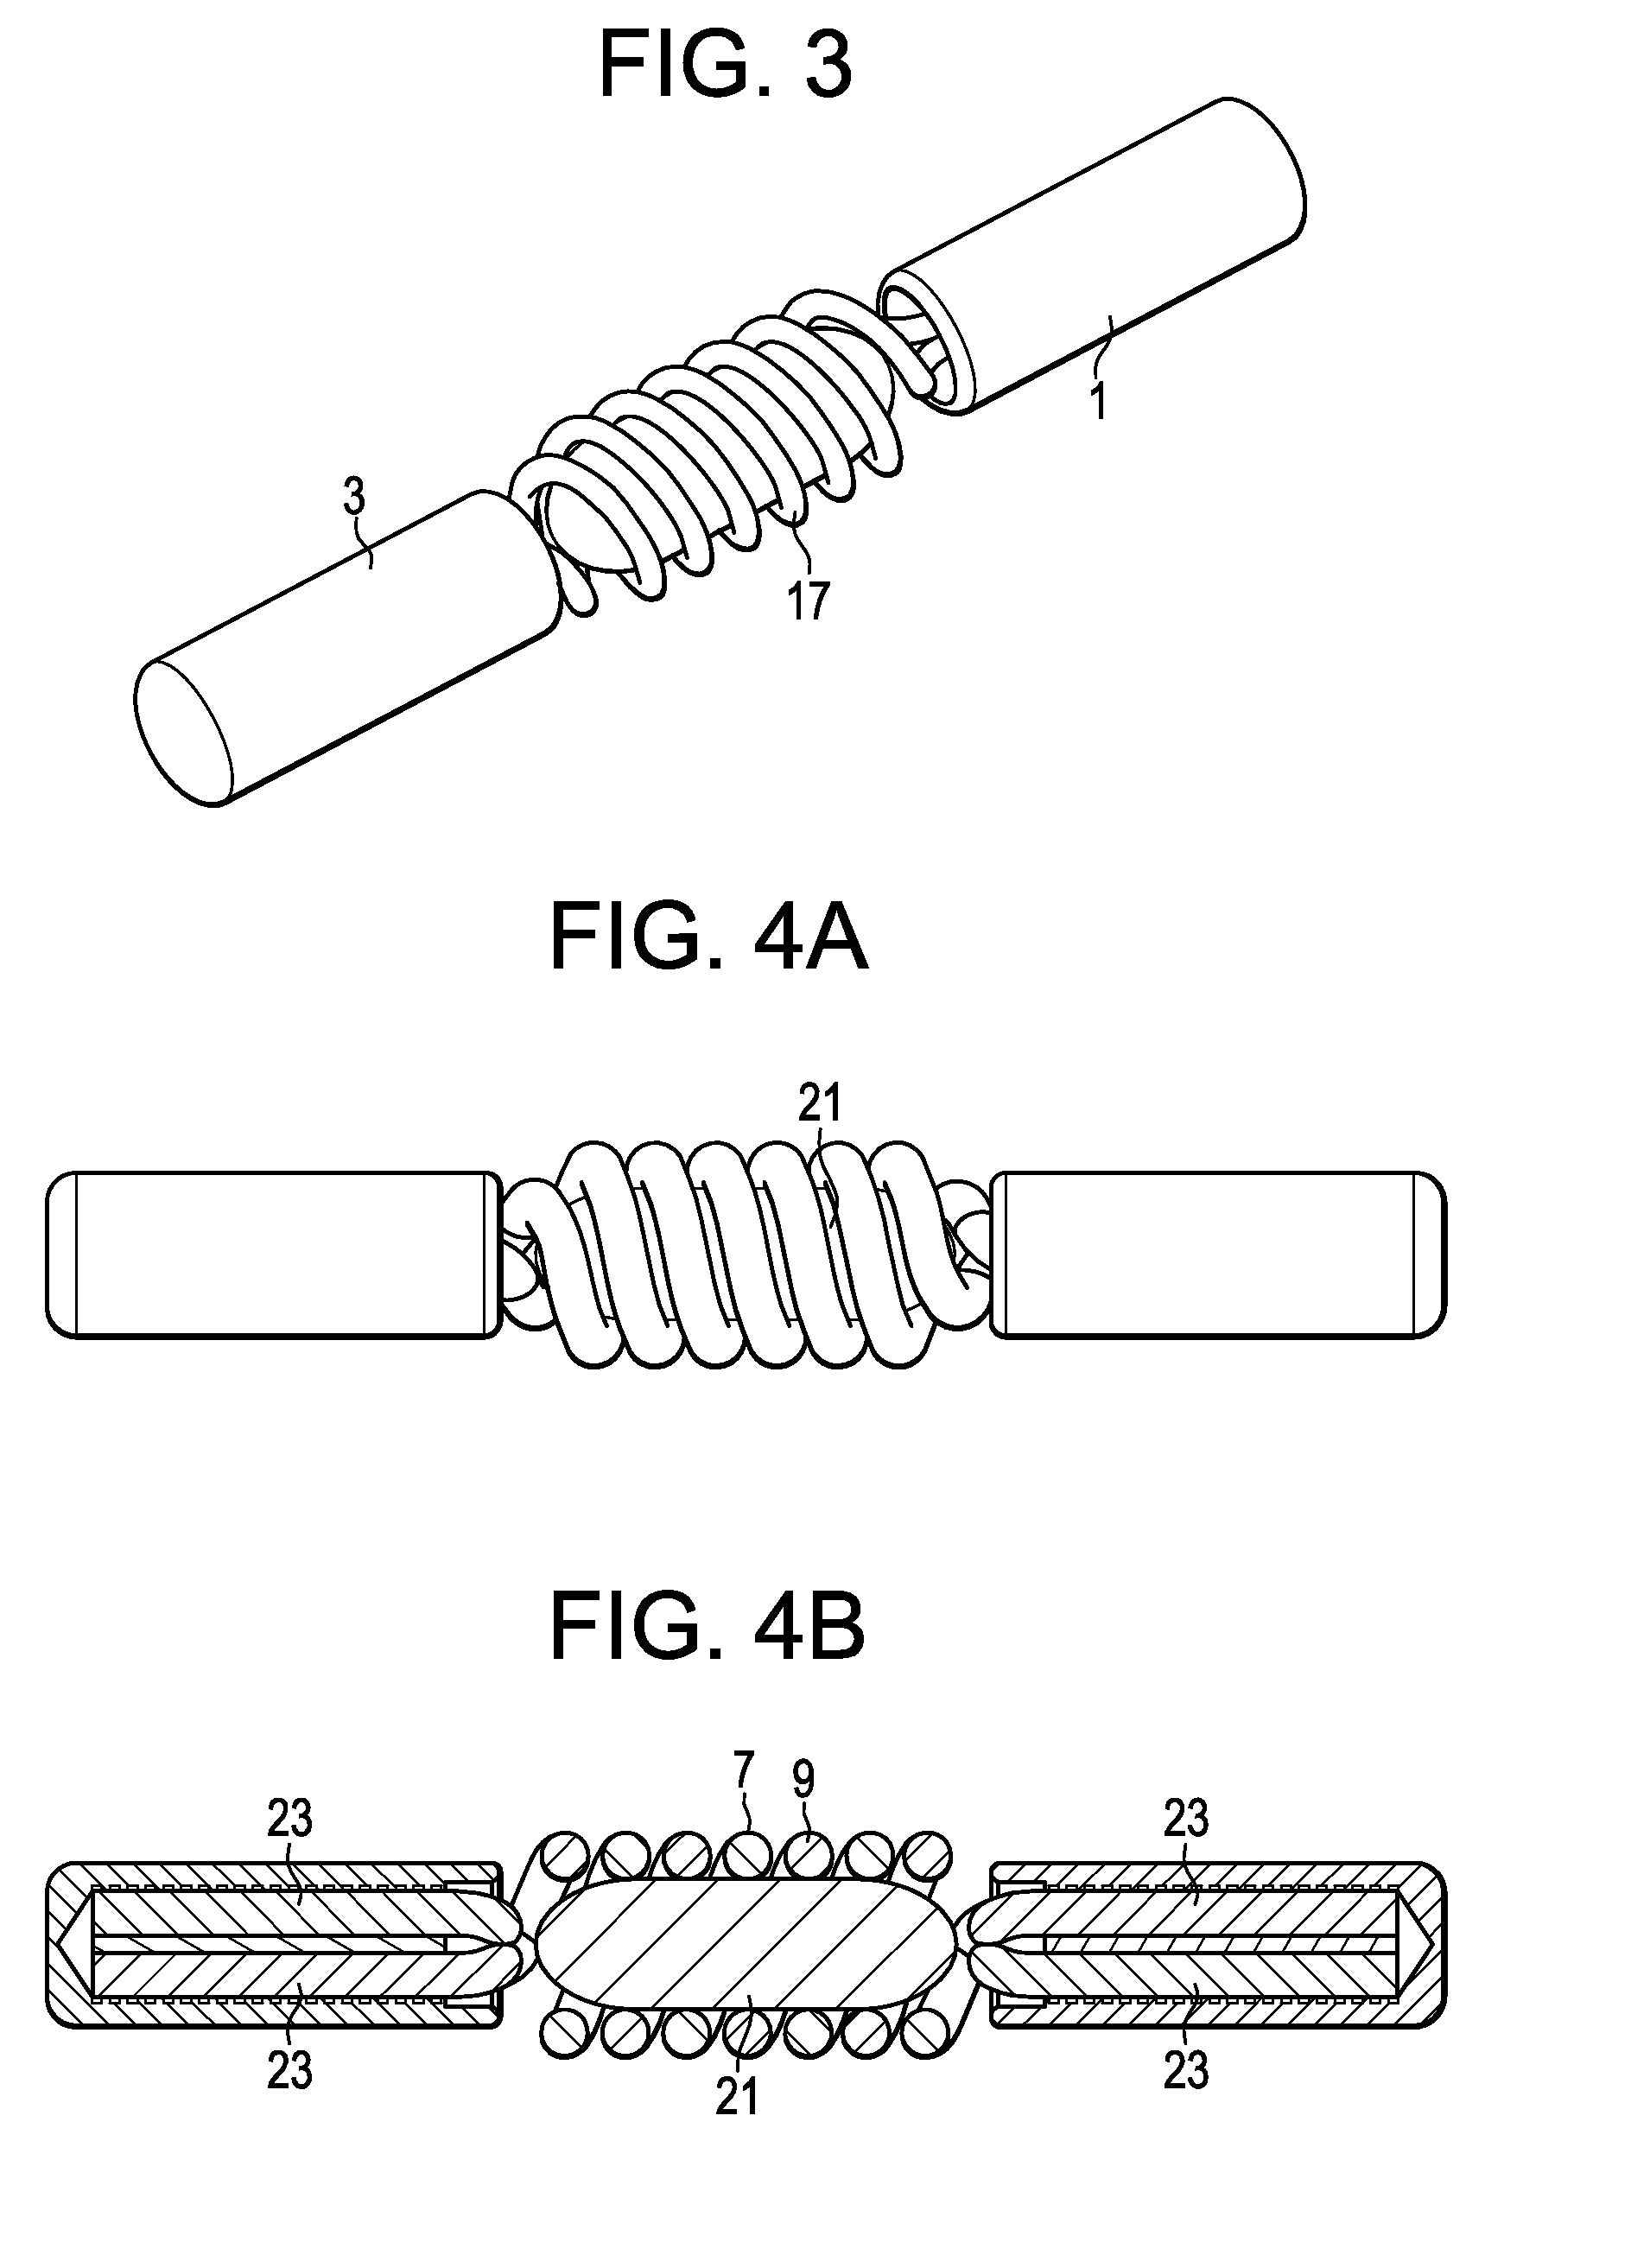 Dual Spring Posterior Dynamic Stabilization Device With Elongation Limiting Elastomers